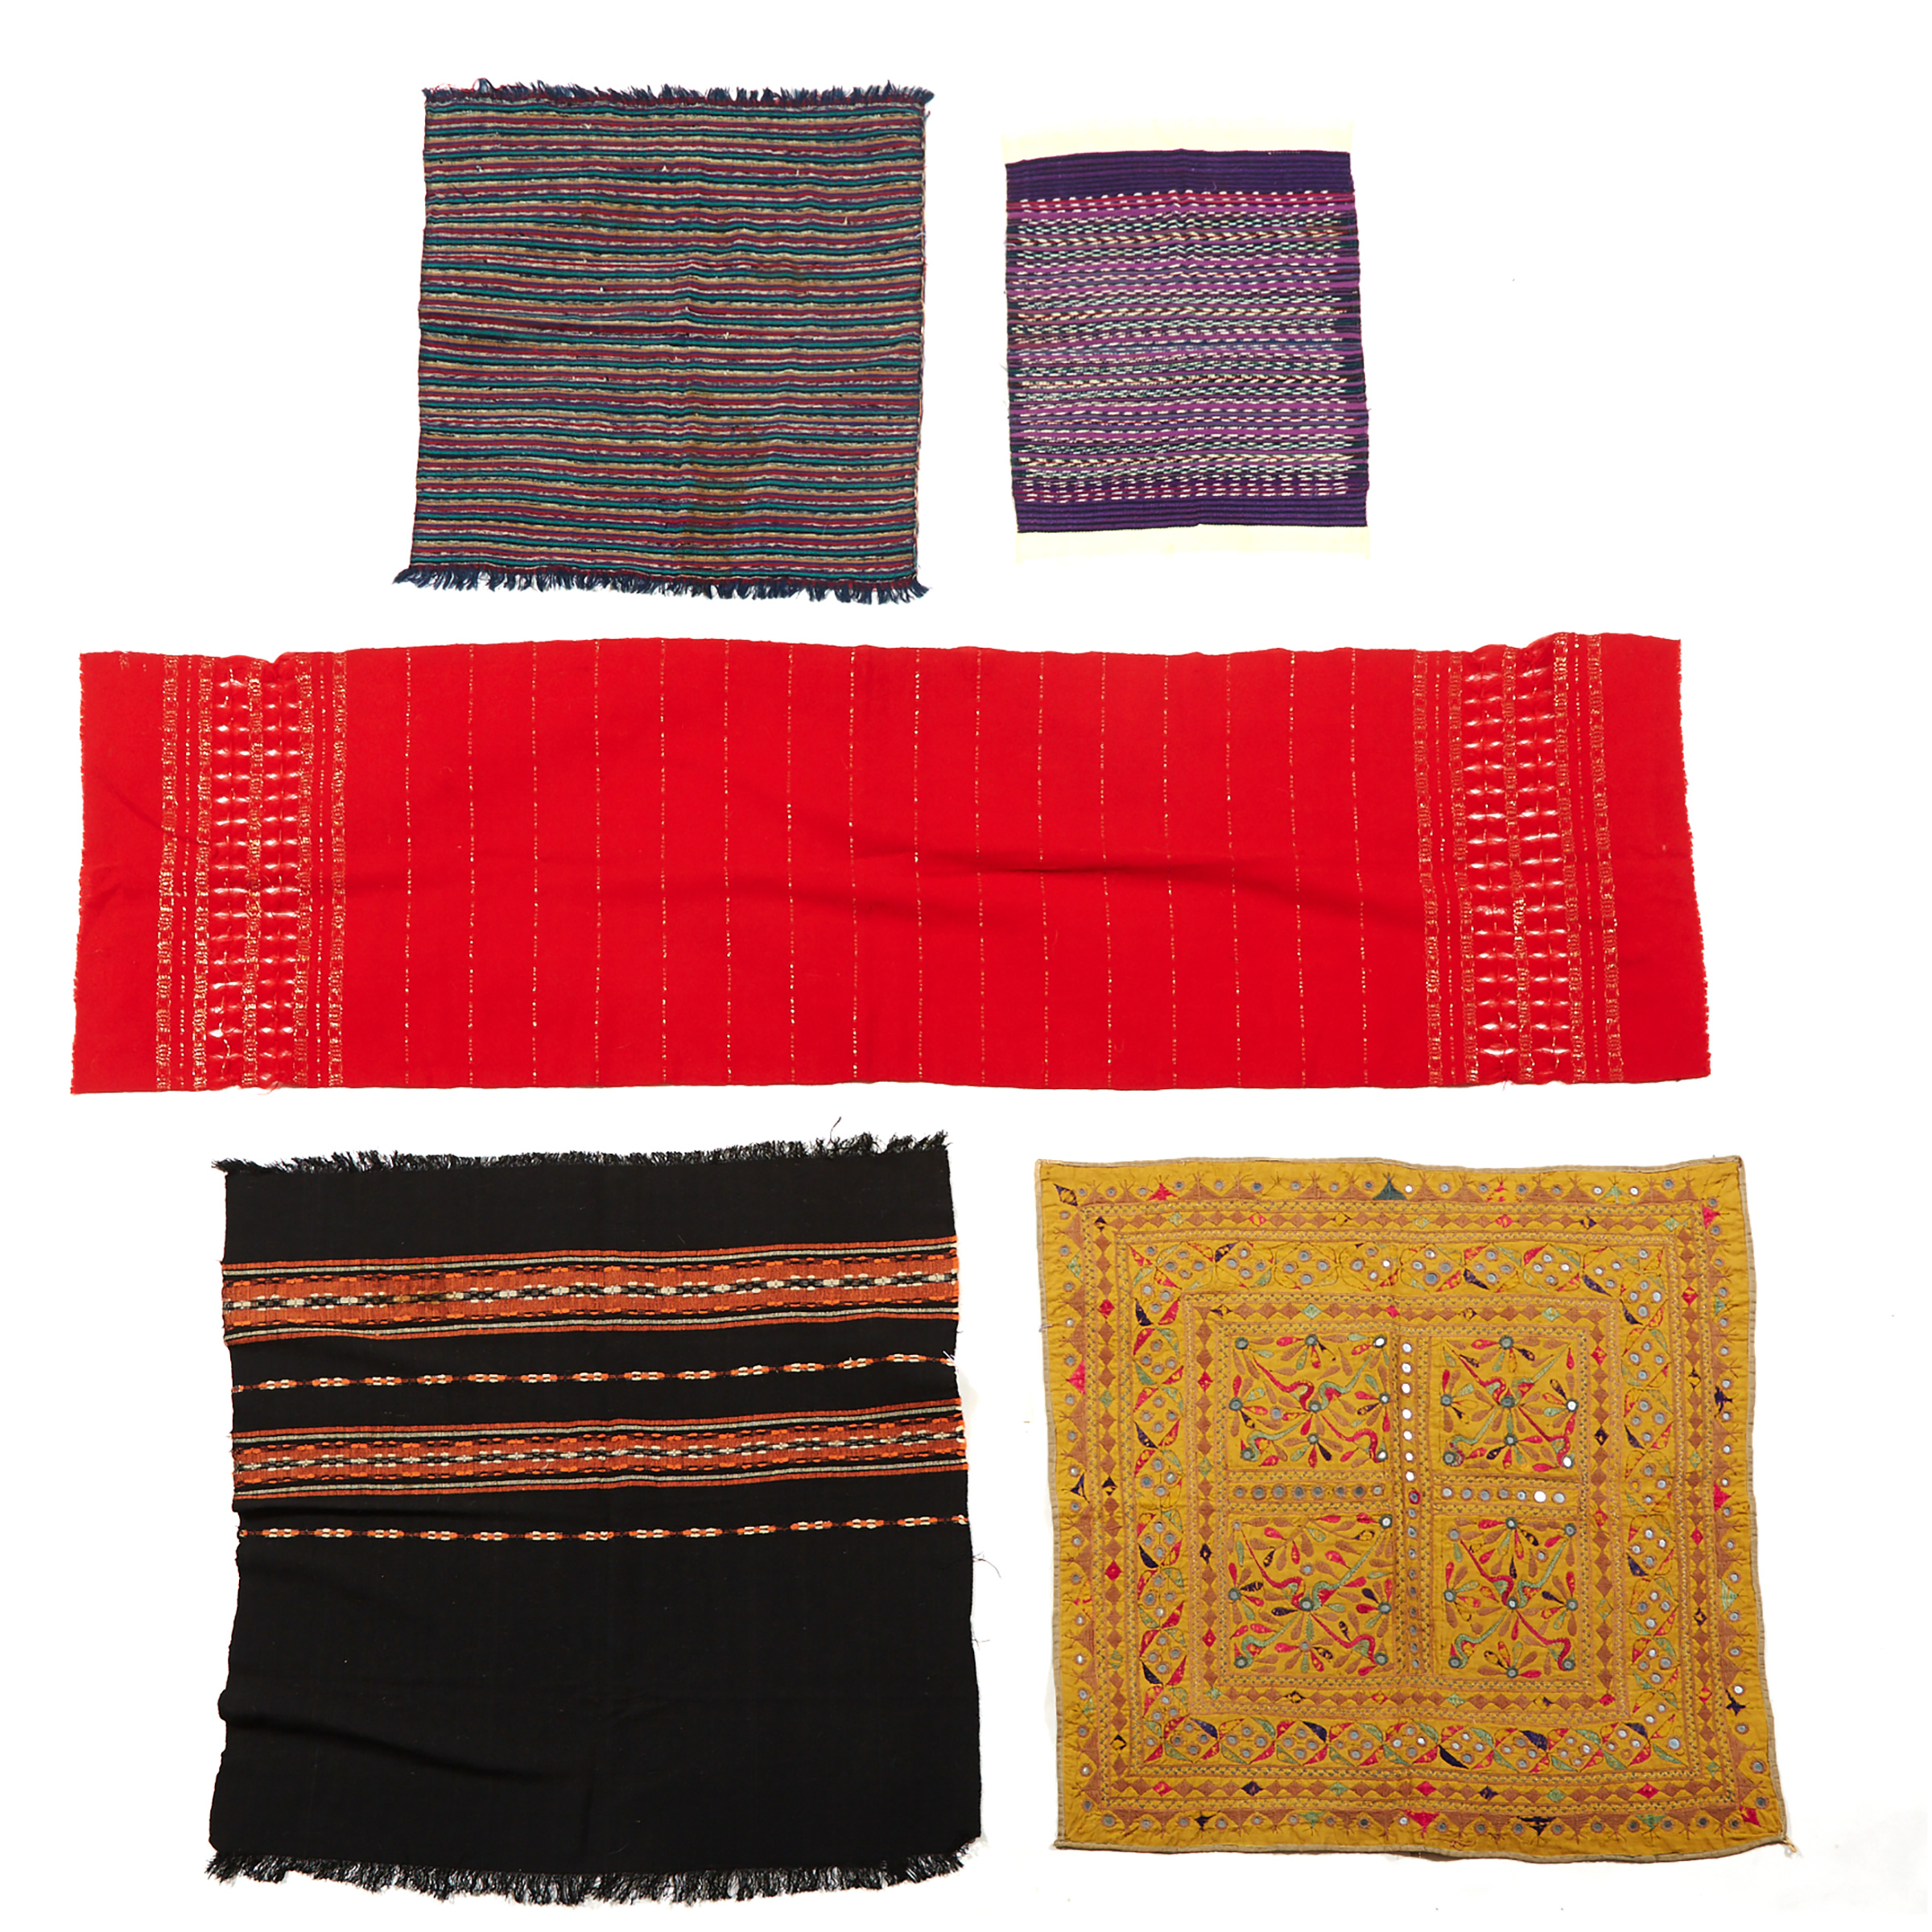 Group of Five Indian Textiles